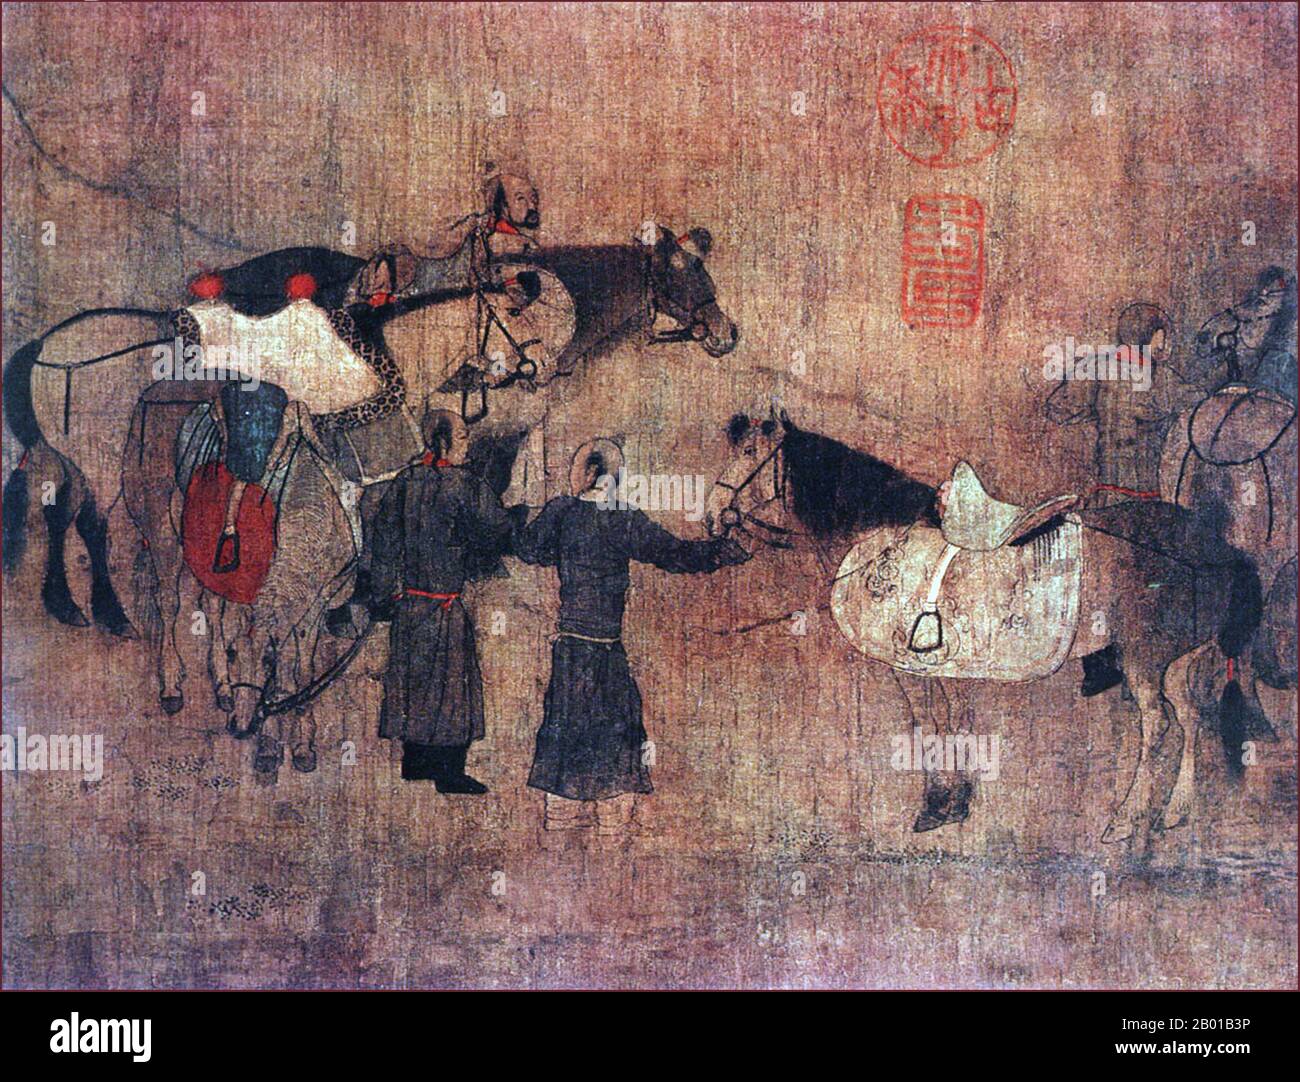 China: 'A Rest-Stop for the Khitan Khan' (left panel). Detail of Handscroll painting by Hu Rang (fl. 10th century), Five Dynasties and Ten Kingdoms period, (907-960), 10th century.  The Khitan people (or Khitai, Kitan, or Kidan), were a nomadic Mongolic people, originally located in Mongolia and Manchuria (the northeastern region of modern day China) from the 4th century. They dominated a vast area in northern China by the 10th century under the Liao Dynasty, but have left few relics that have survived until today. Stock Photo